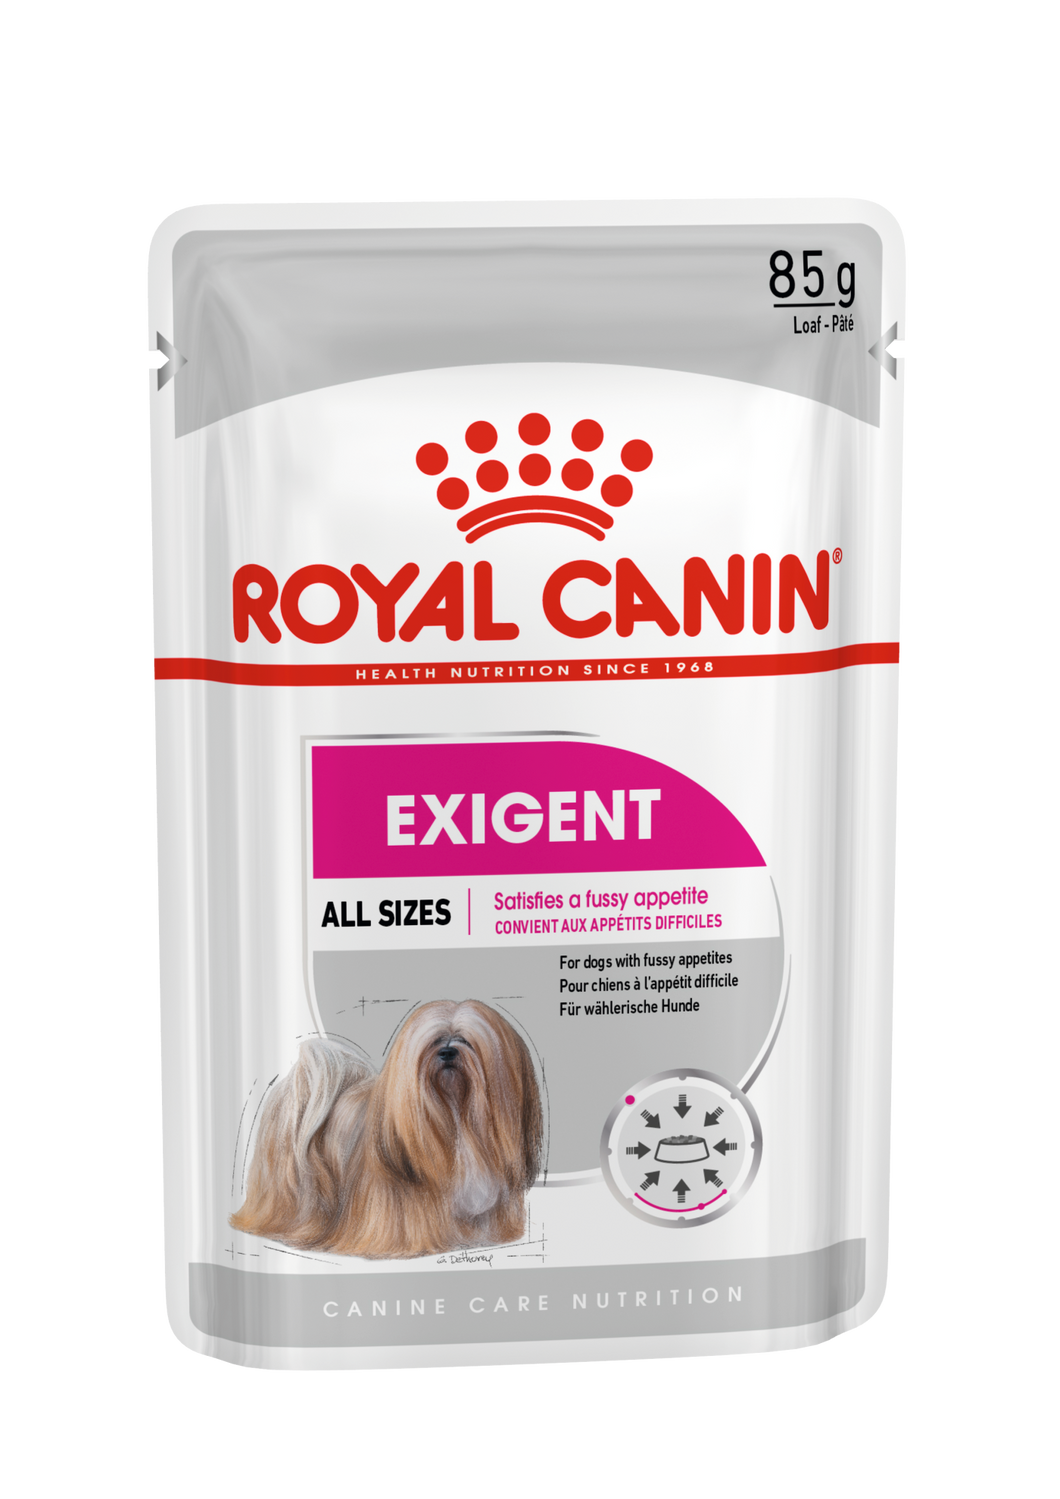 ROYAL CANIN® Exigent Loaf Box of 12x85g